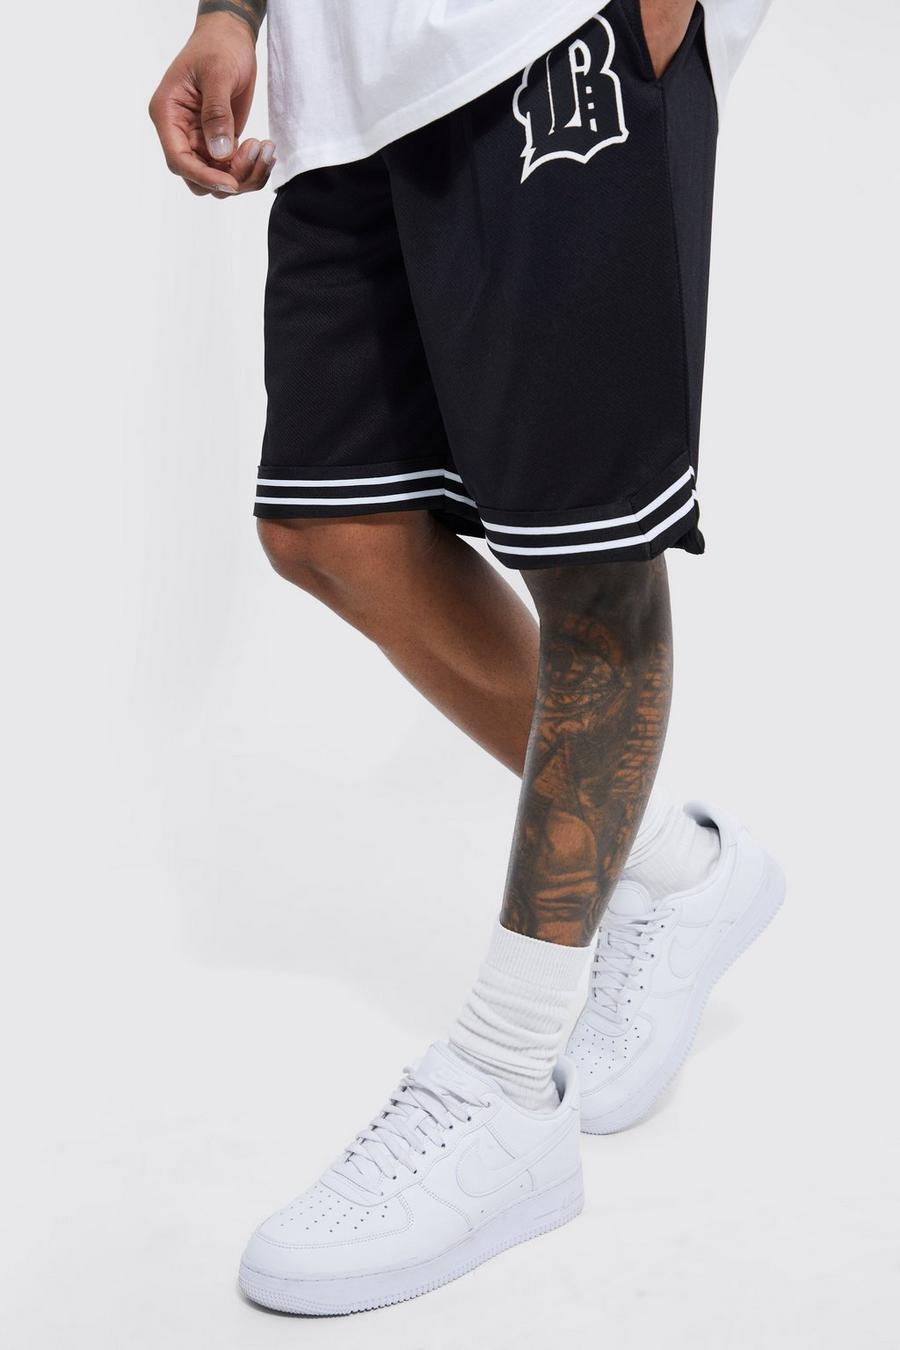 Loose Fit Mid Length Basketball Short